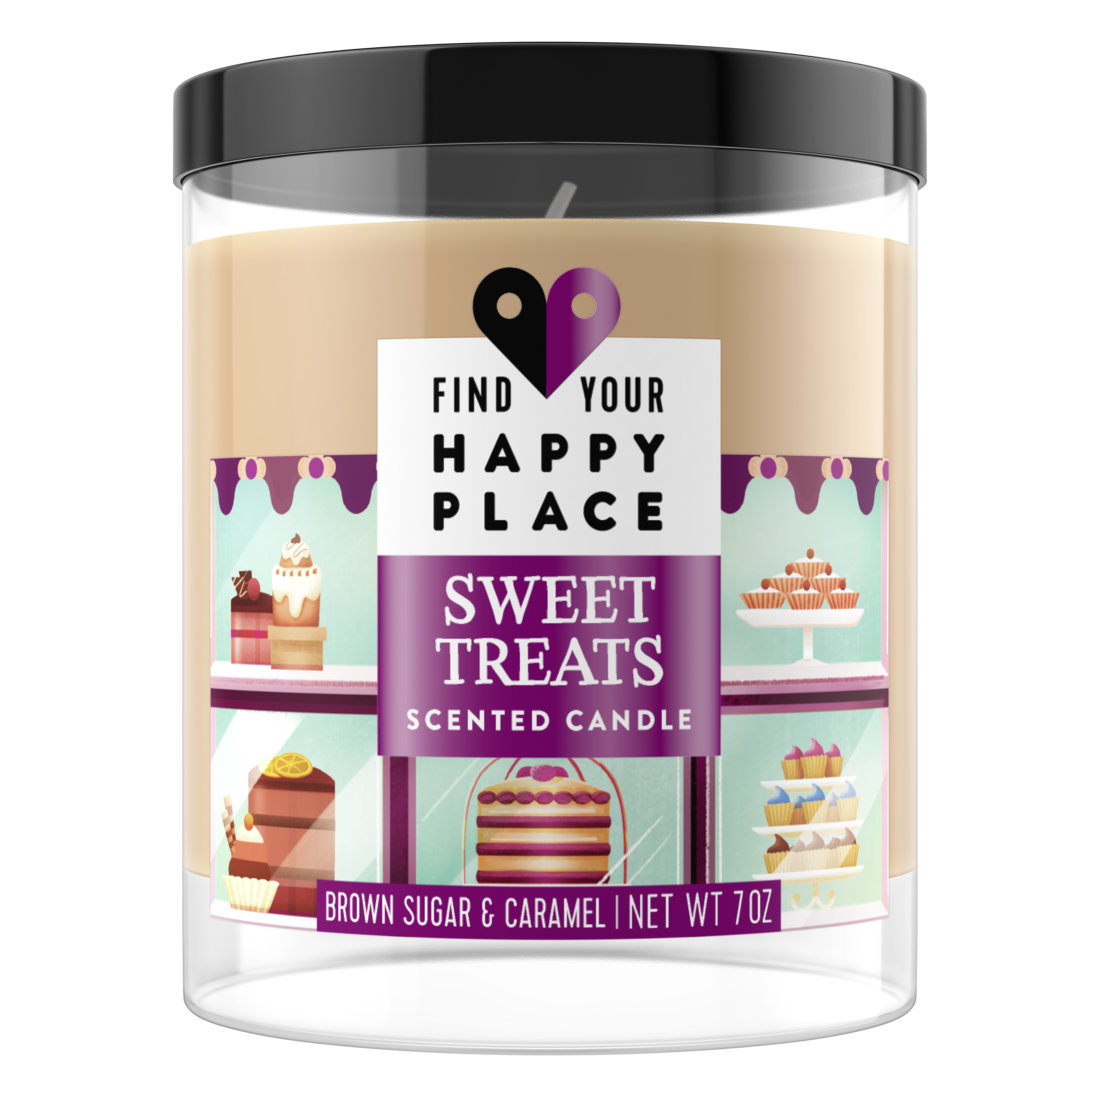 Find Your Happy Place Sweet Treats Scented Candle Brown Sugar